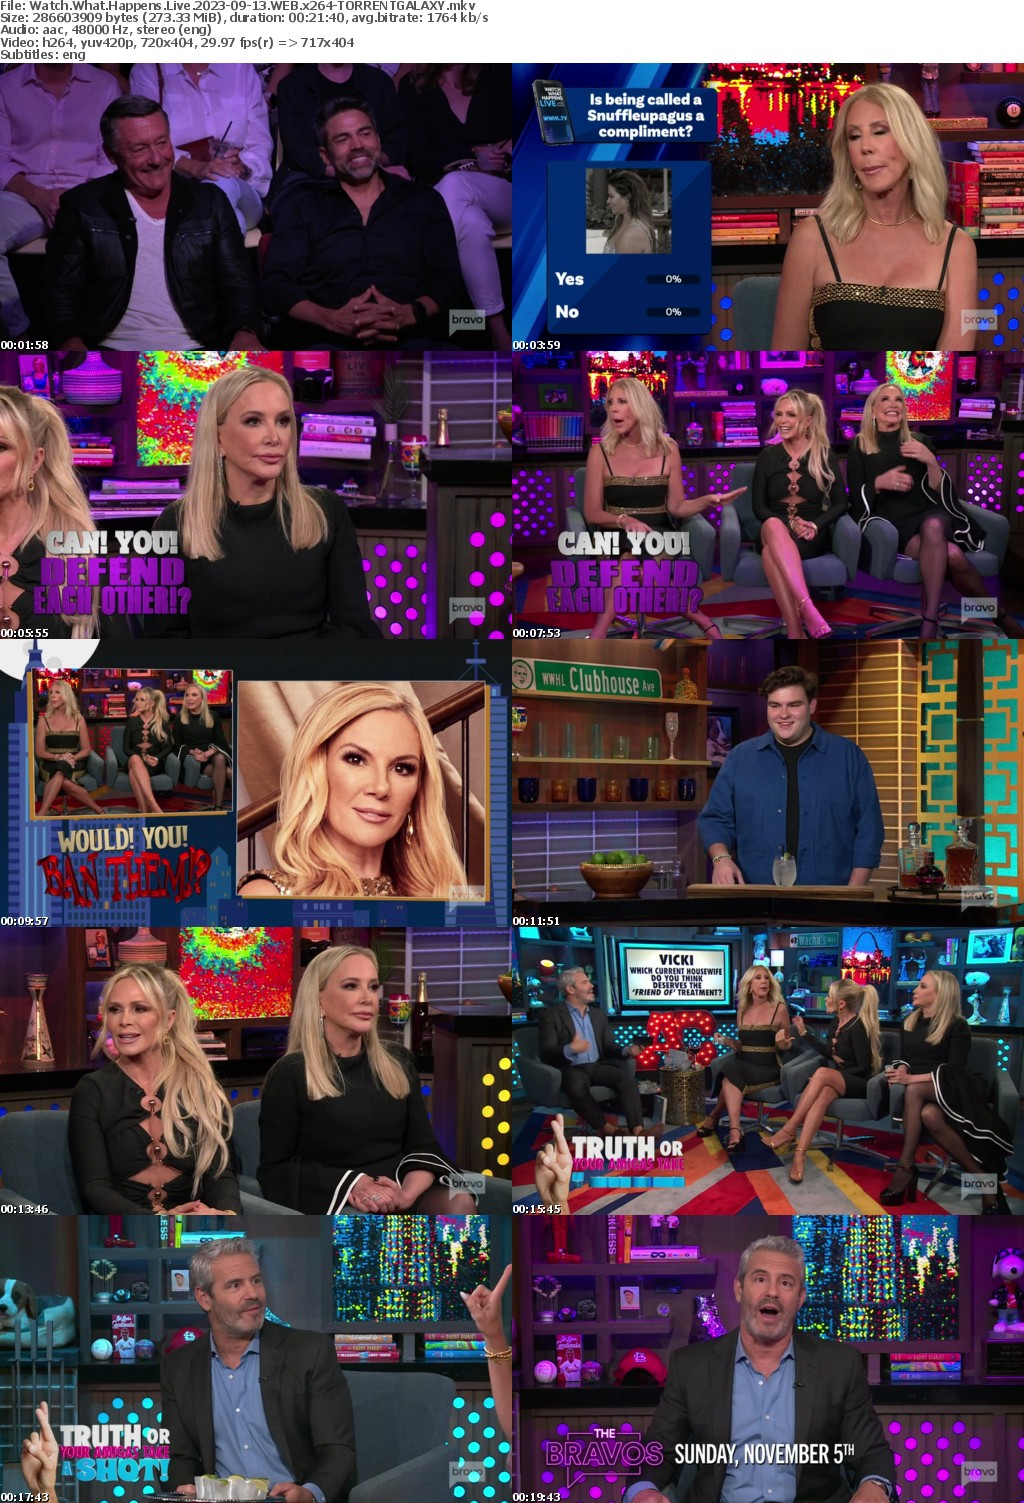 Watch What Happens Live 2023-09-13 WEB x264-GALAXY